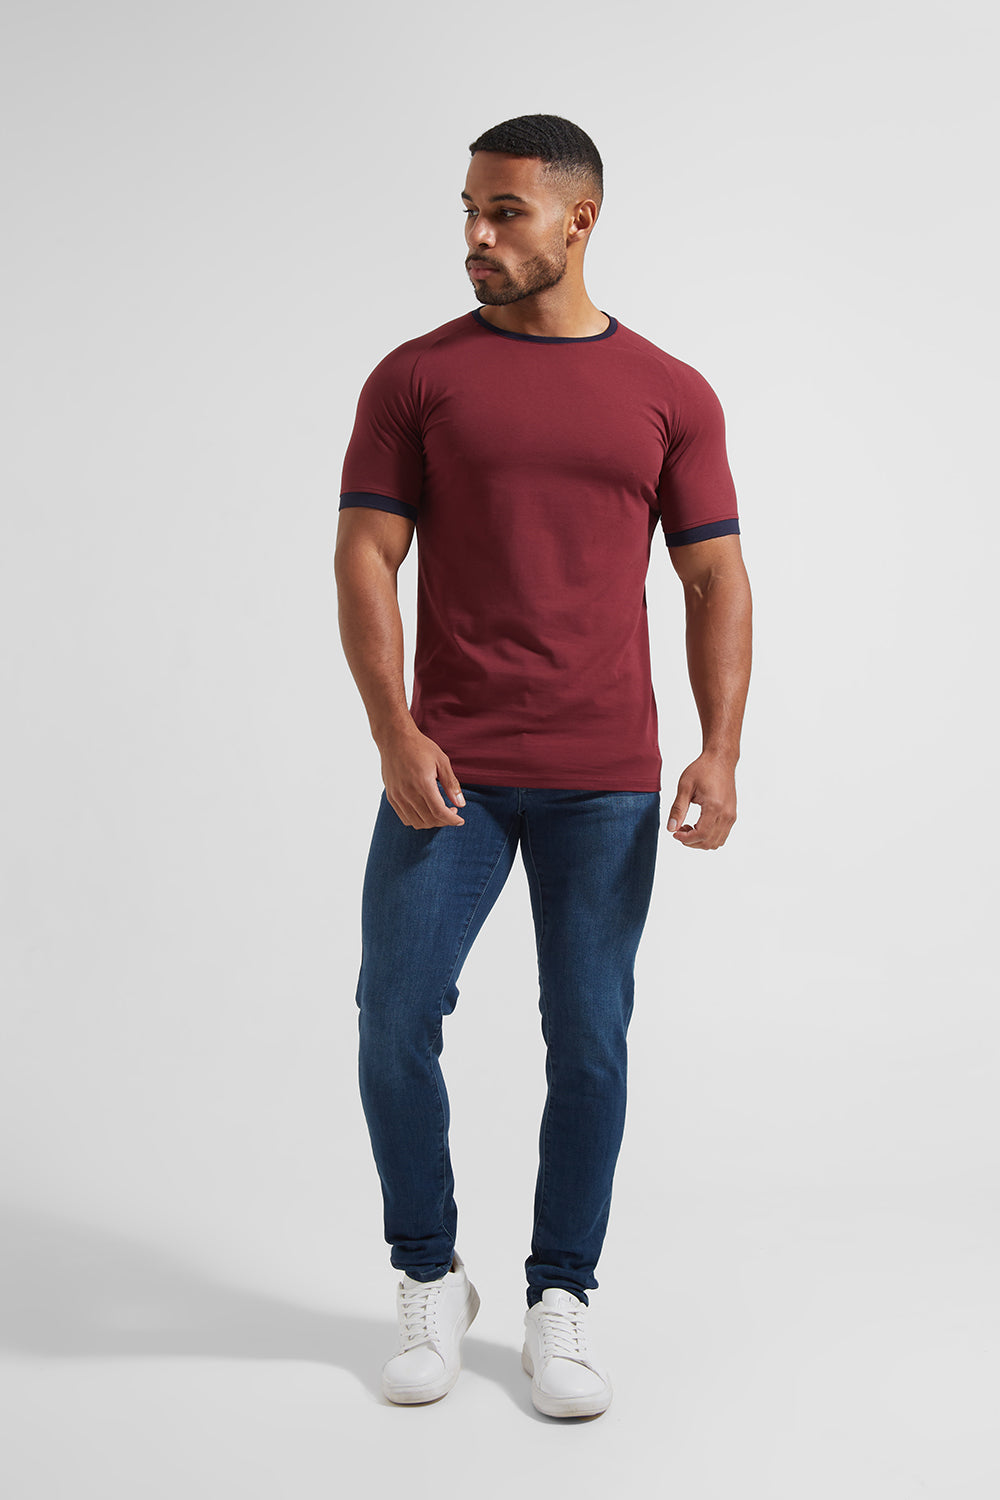 Contrast Trim T-Shirt in Burgundy - TAILORED ATHLETE - ROW